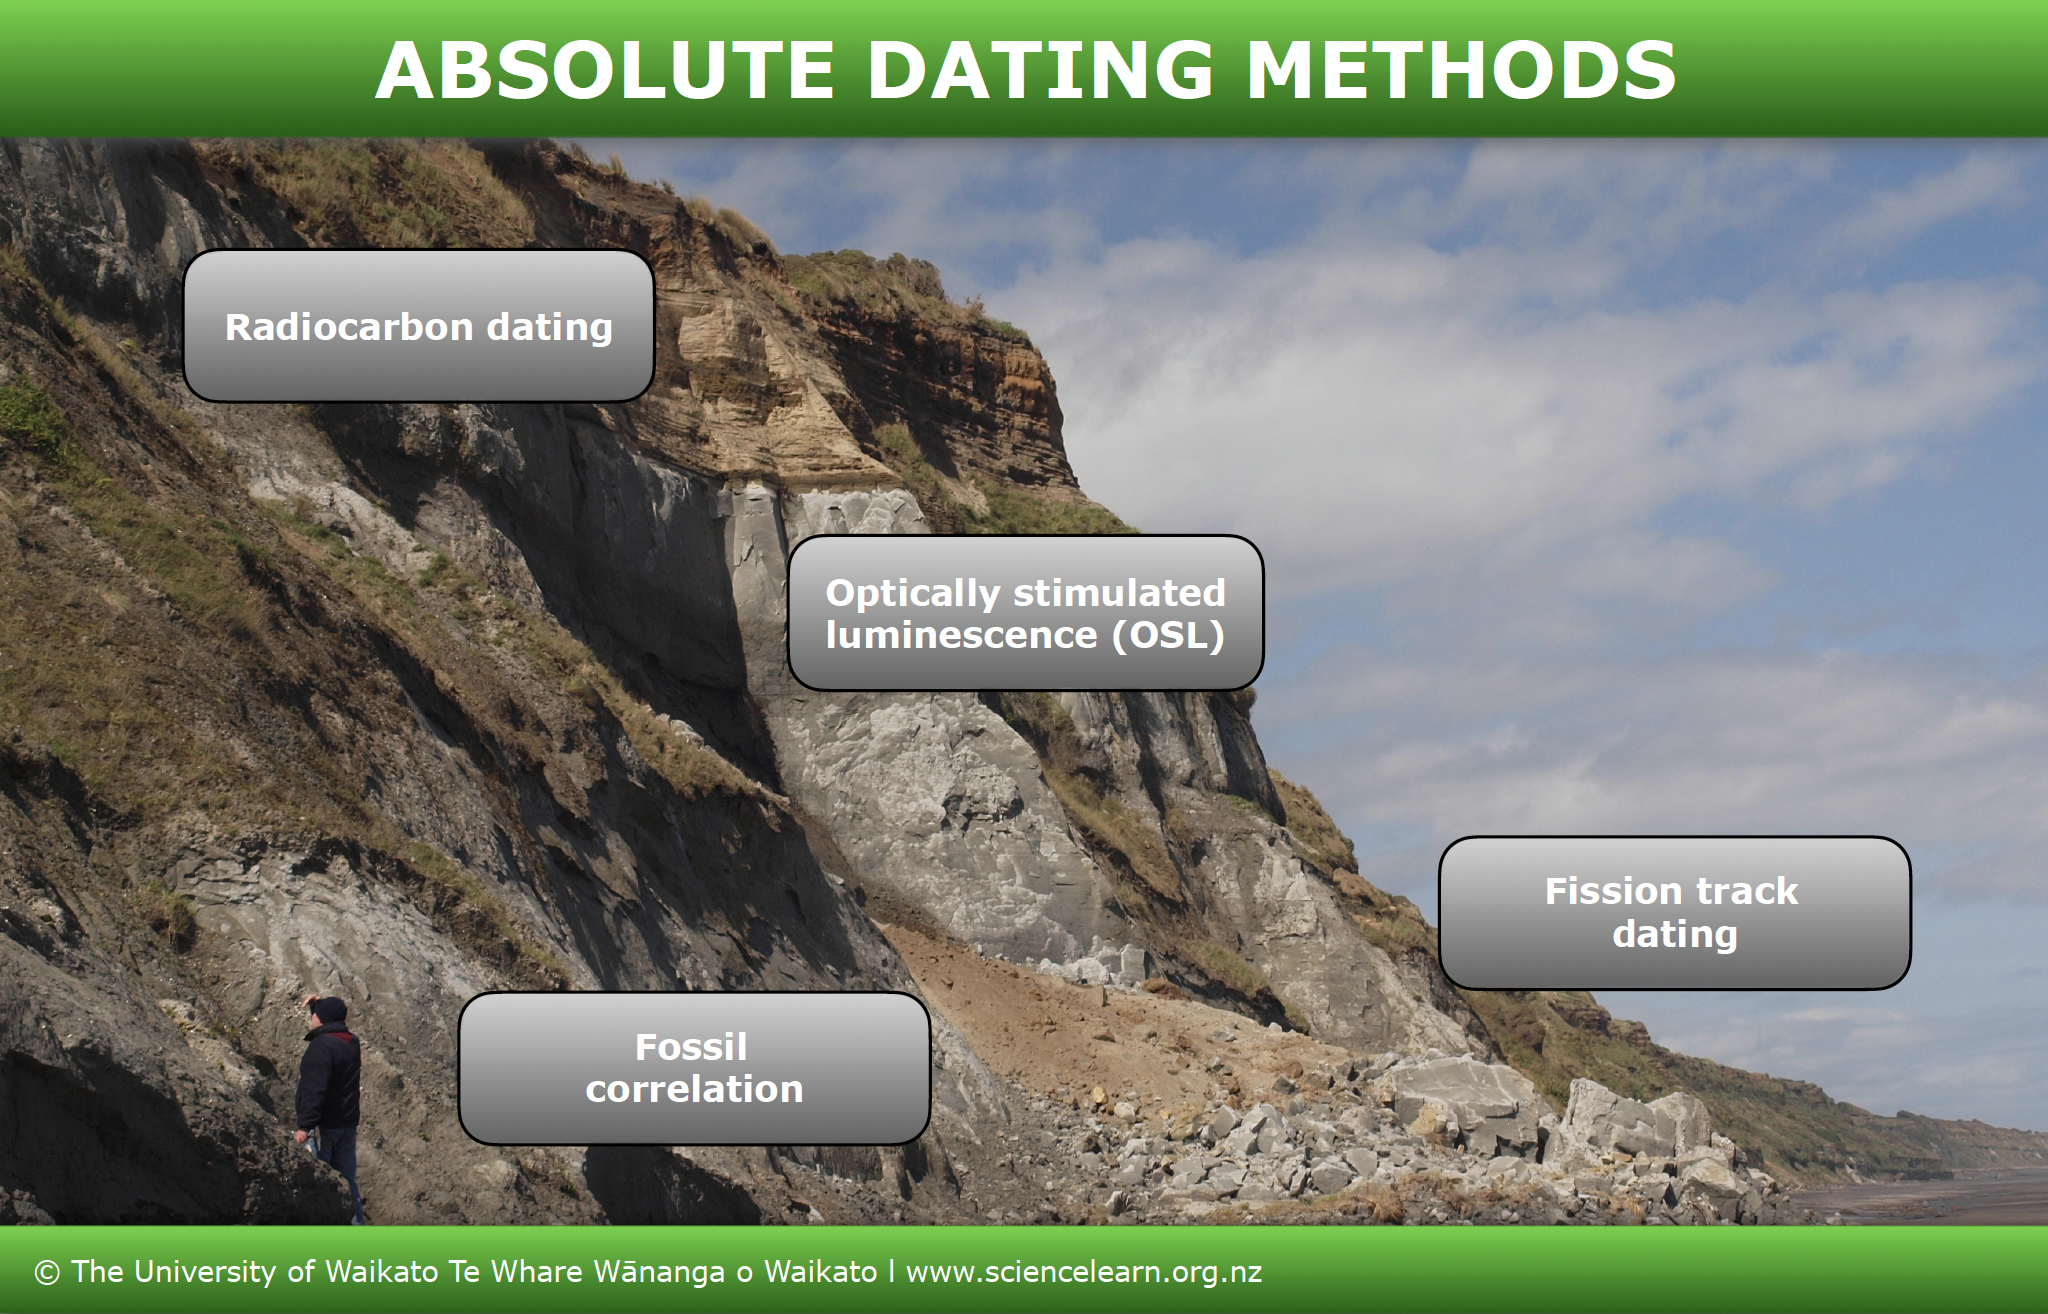 Asolute dating methods – interactive image map. 